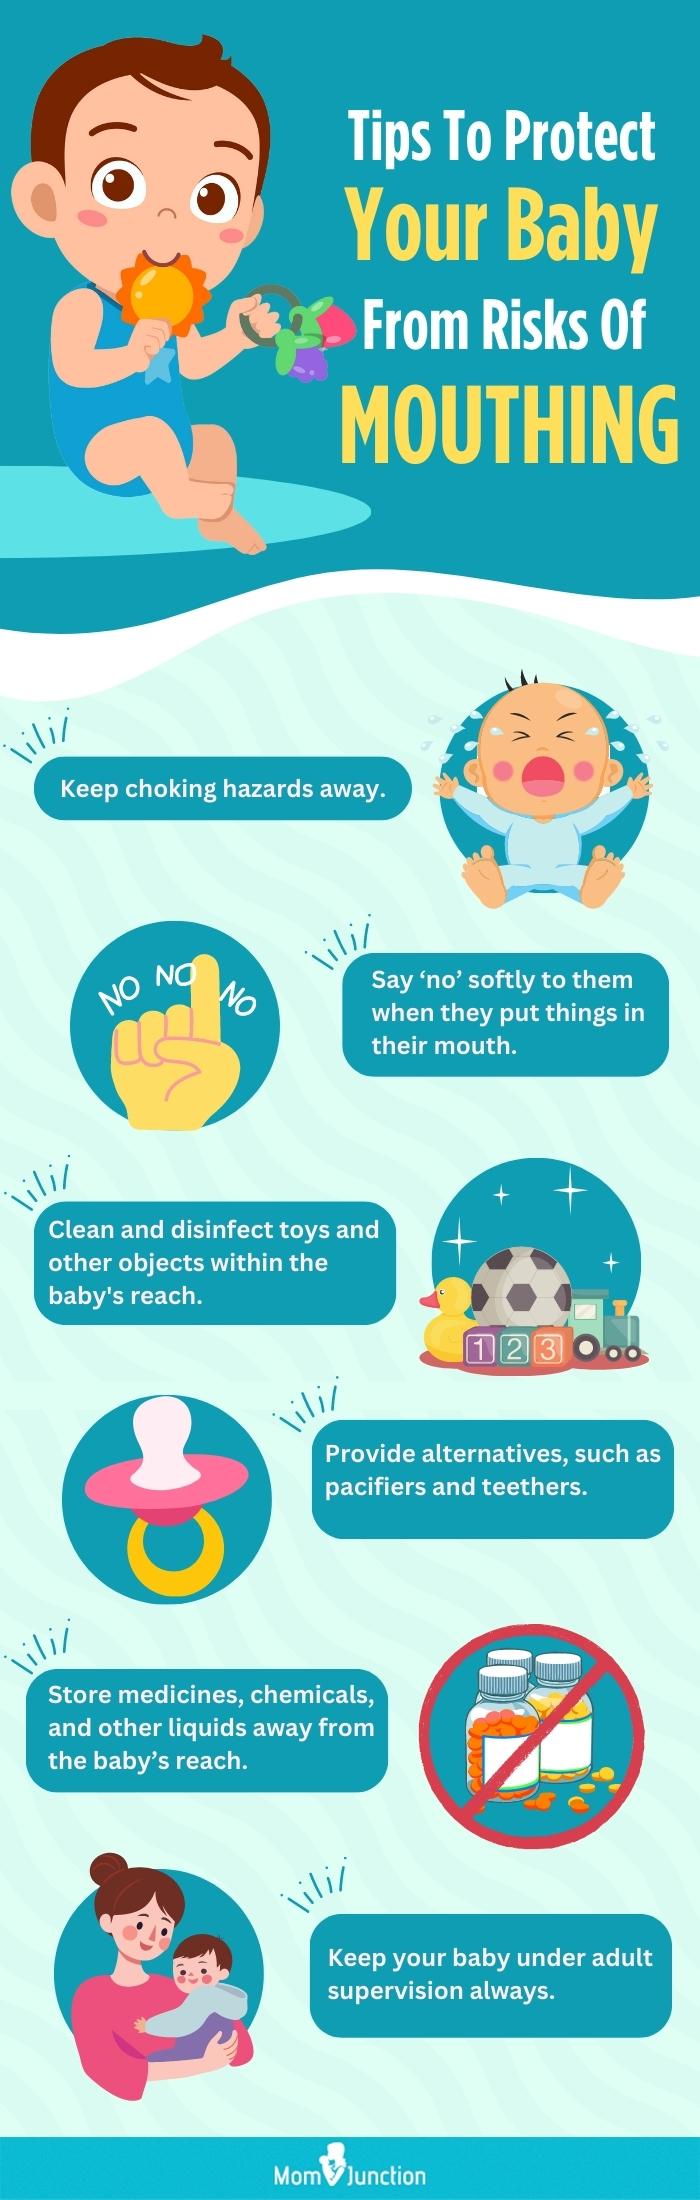 tips to protect your baby from risks of mouthing (infographic)